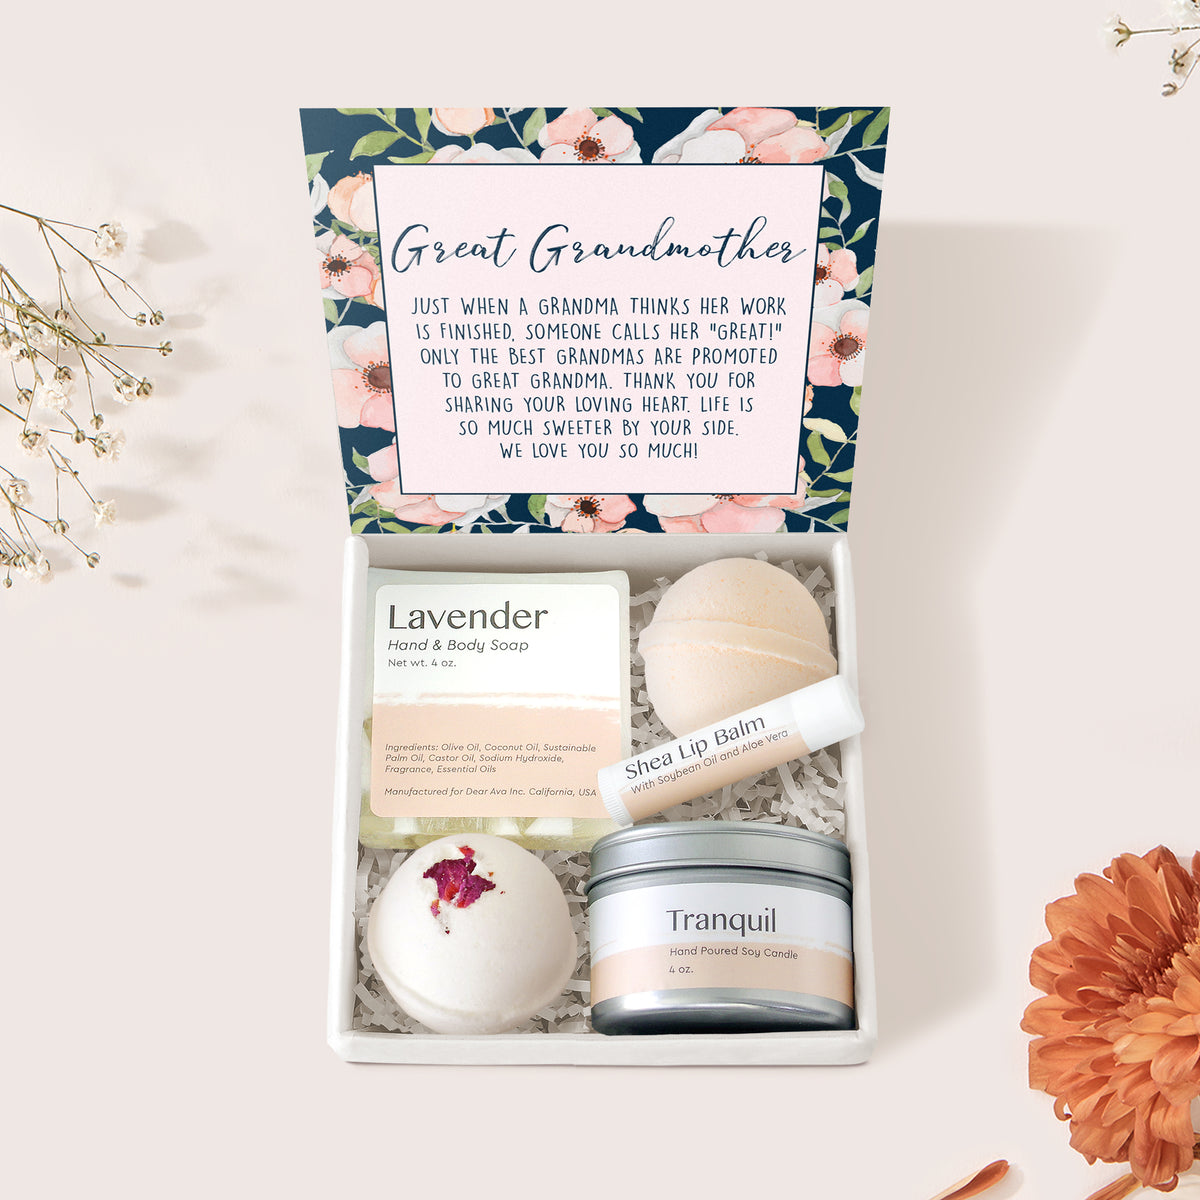 Great Grandmother Spa Gift Box